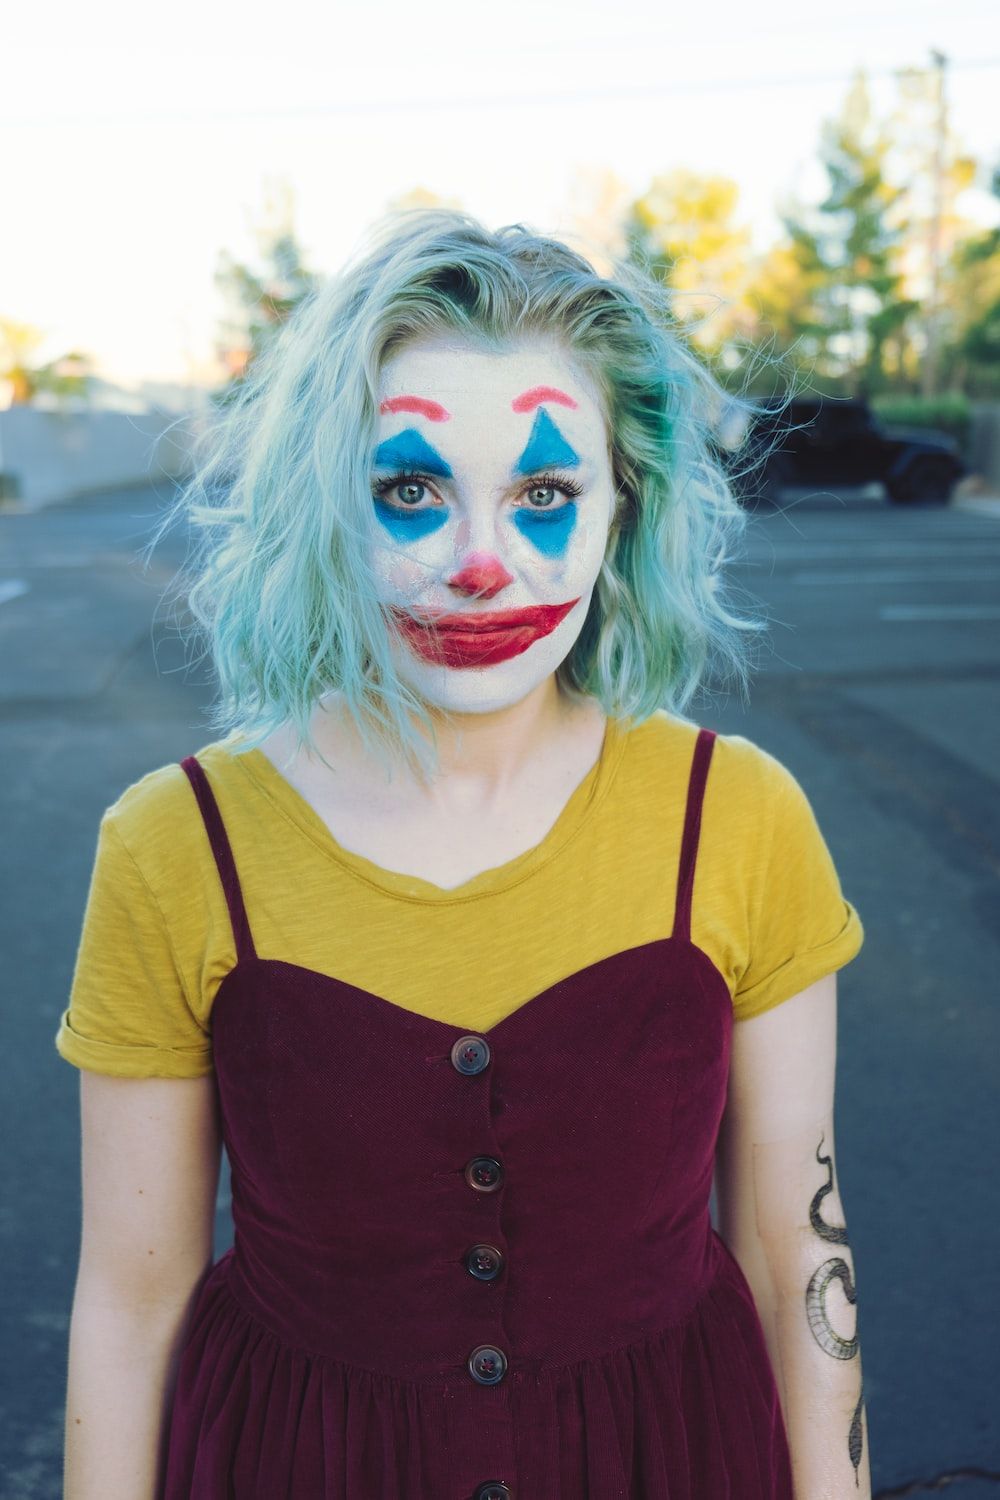 Clown Mask Picture. Download Free Image